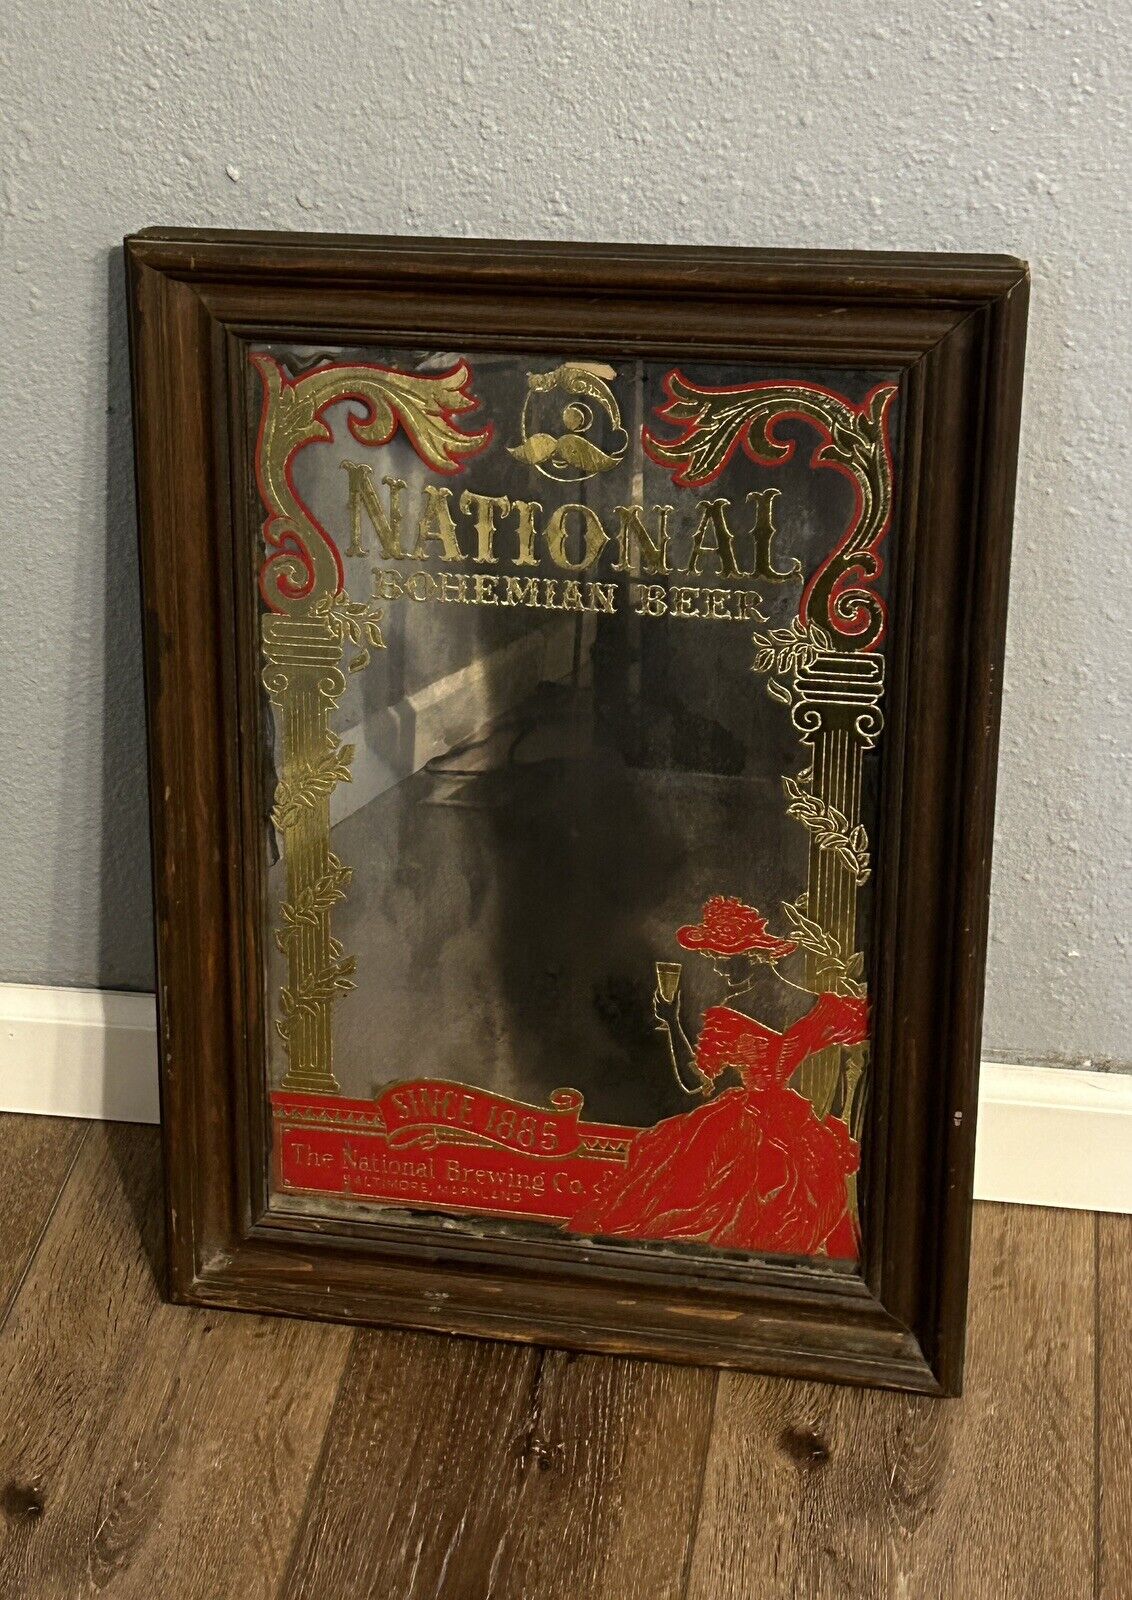 Vintage National Bohemian Beer Mirror Sign National Brewing Baltimore Since 1885